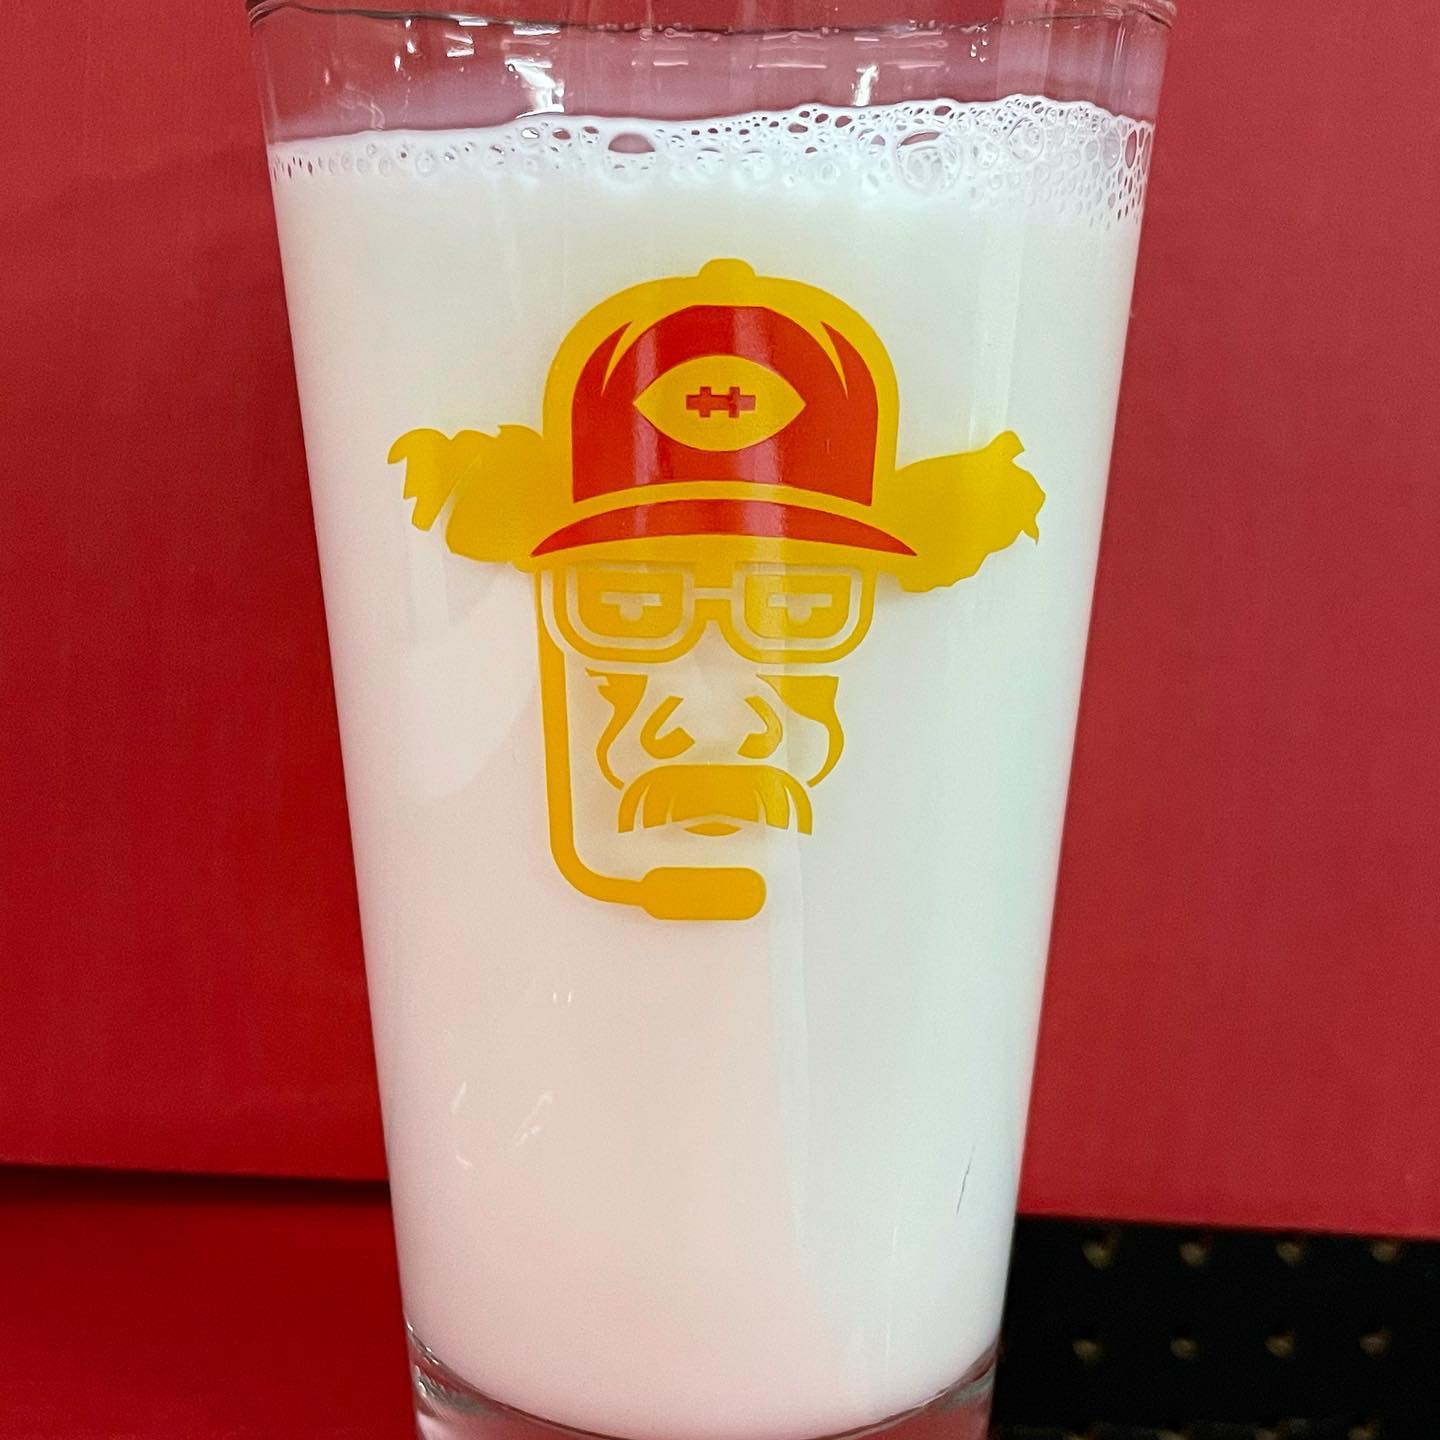 Shatto Milk celebrates Chiefs with specialedition Andy Reid milk bottles